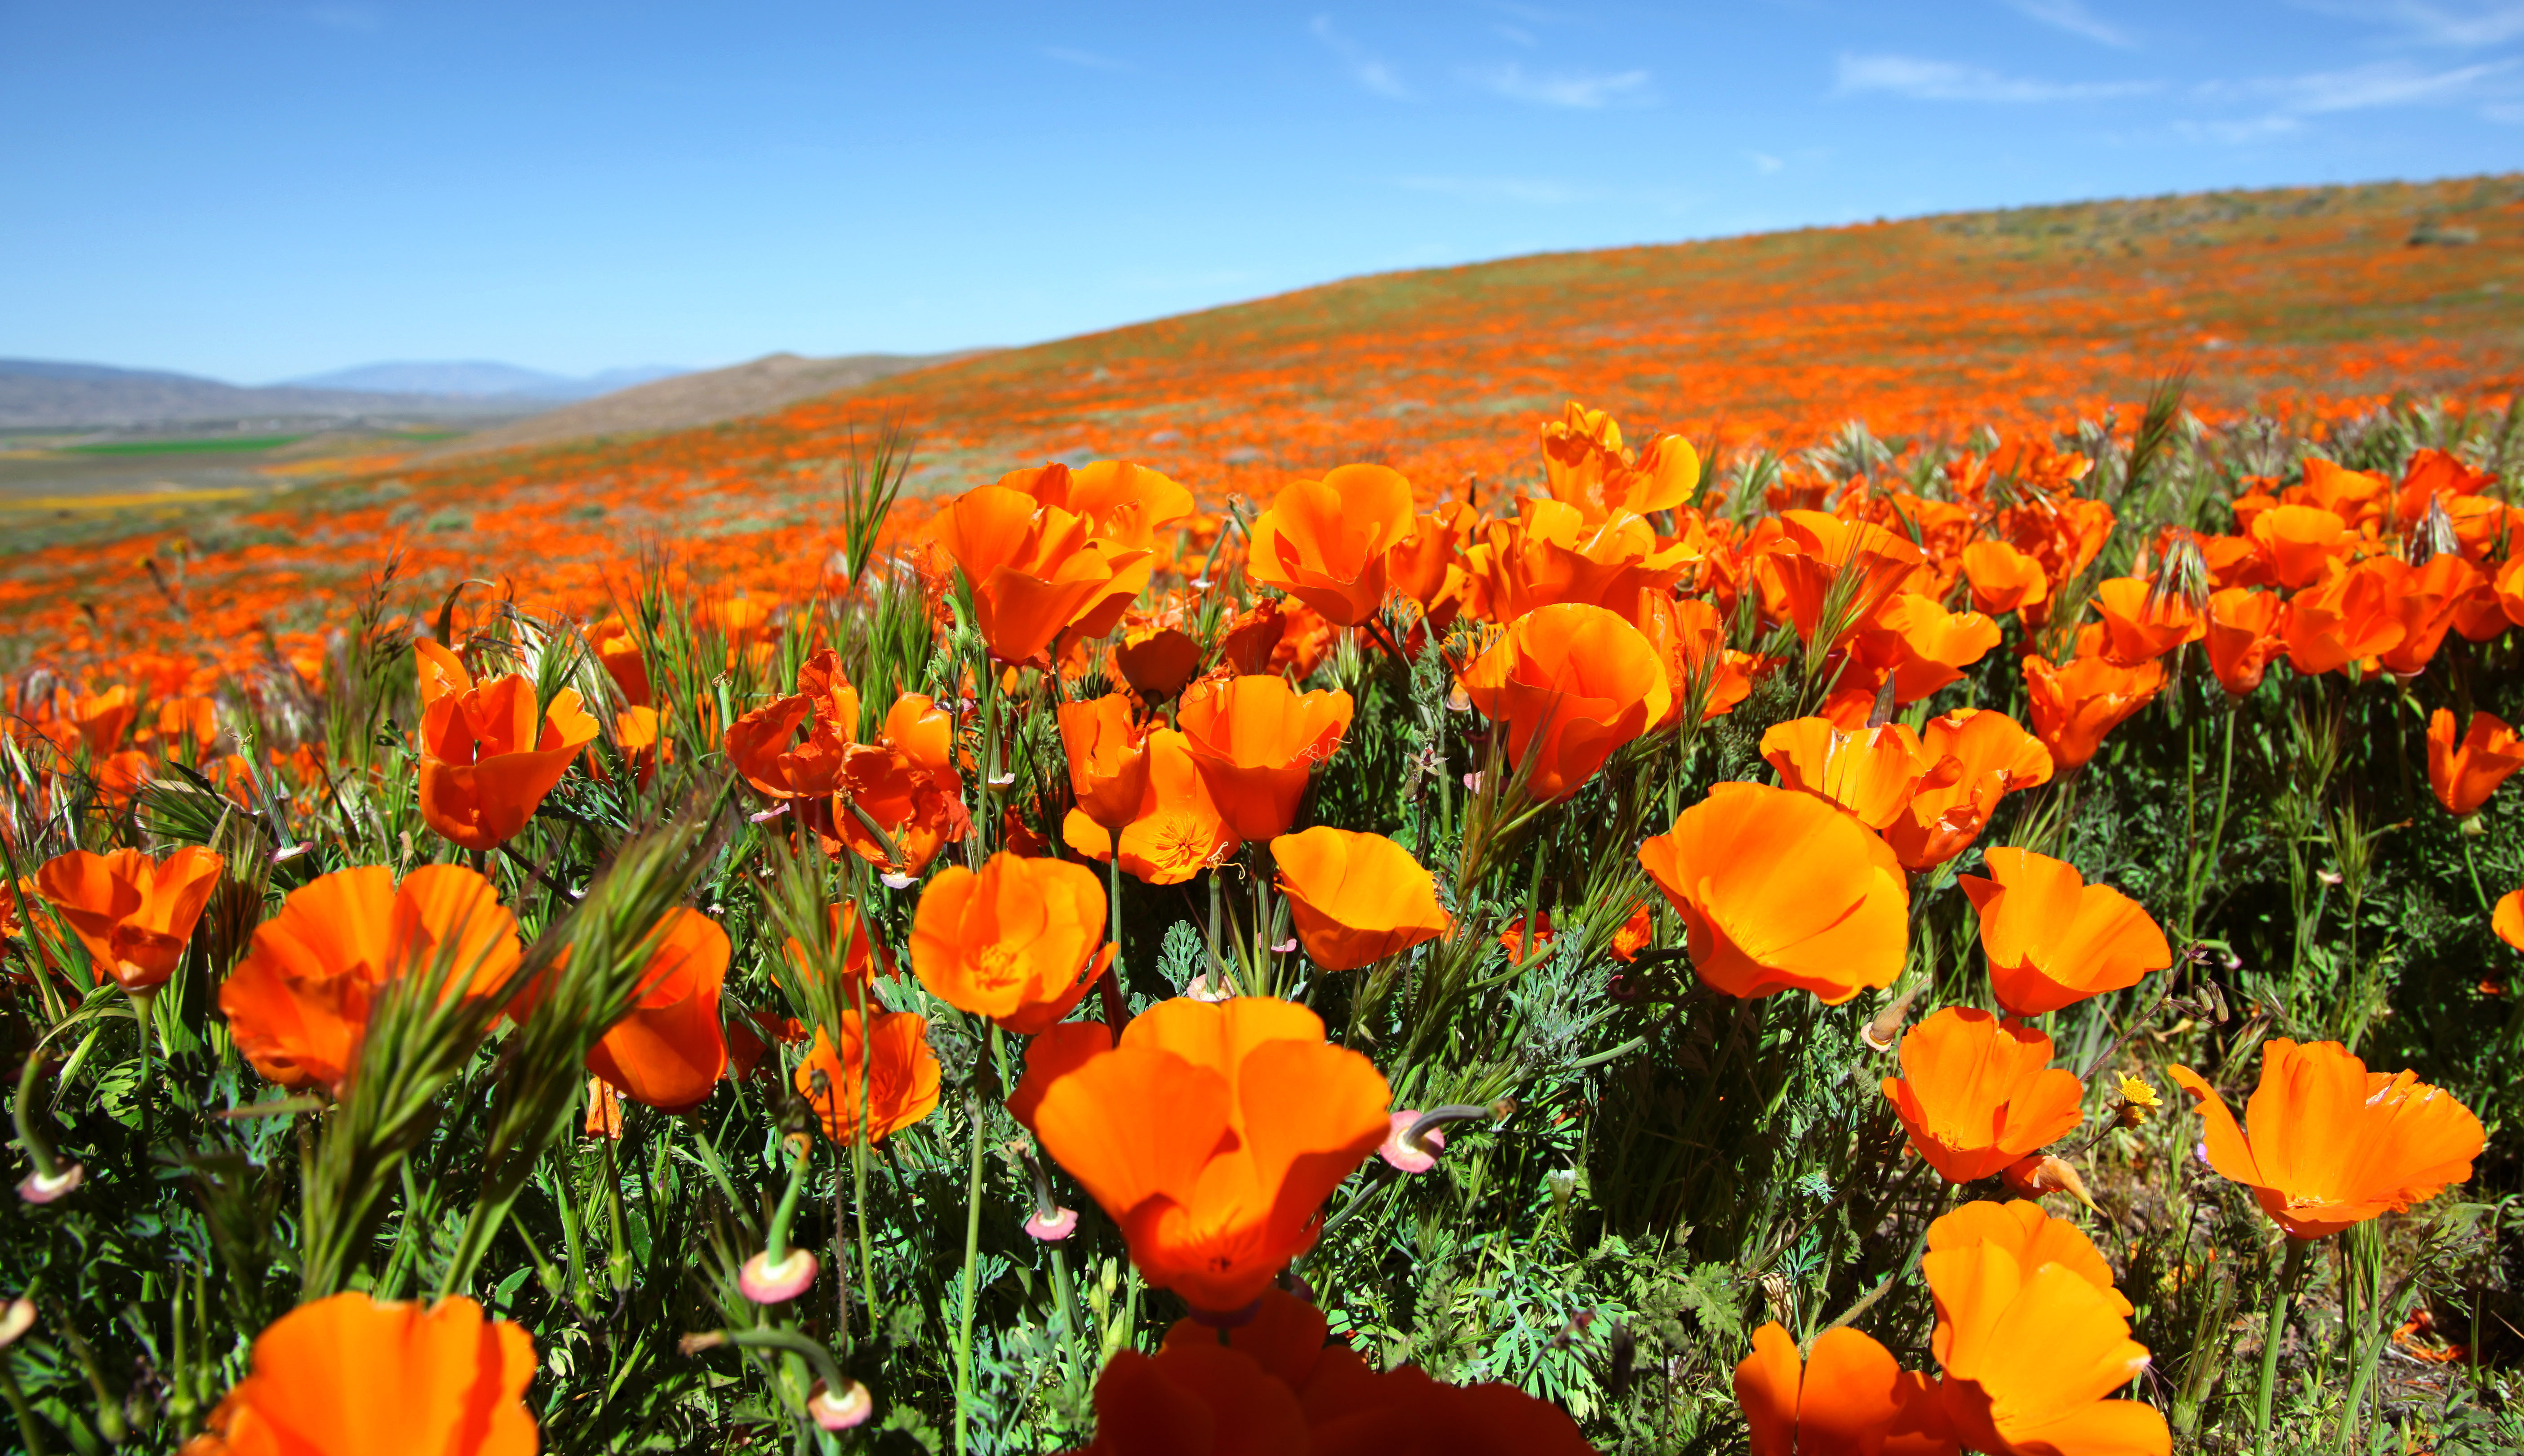 A field of California poppies